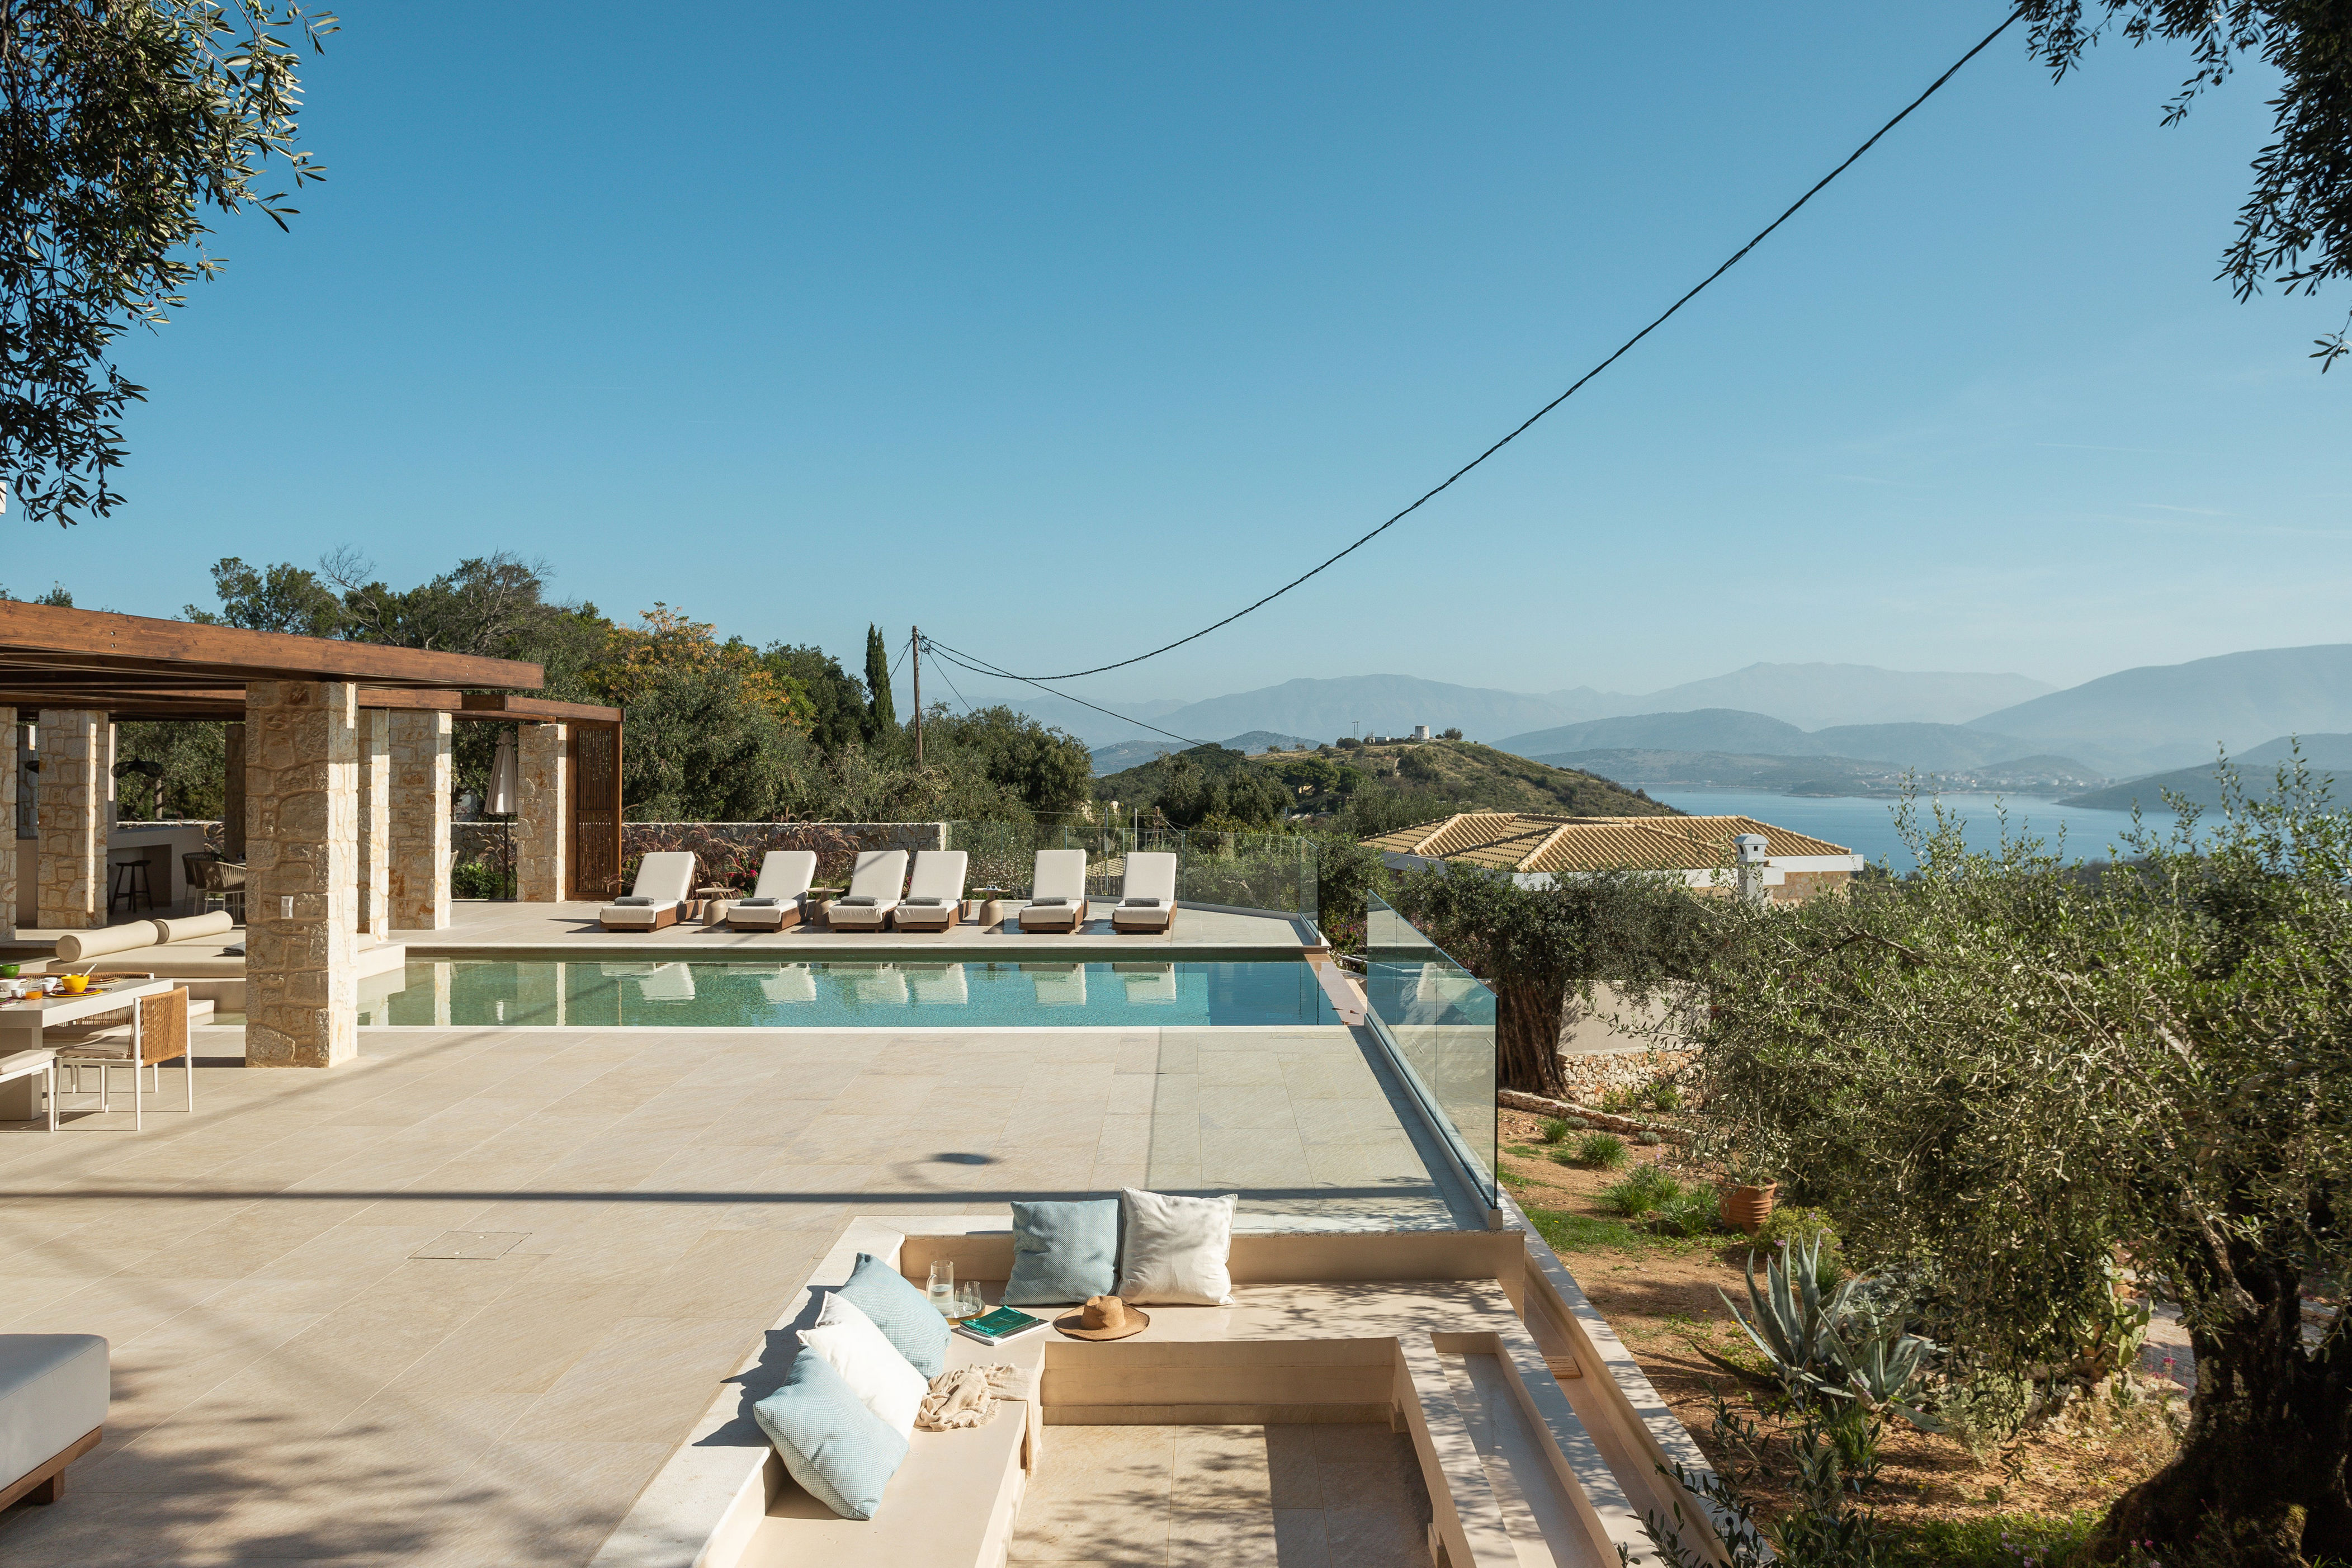 <p><strong>San Stefano, Corfu</strong></p> <p>In the quiet hillside of North East Corfu’s undiscovered San Stefano region, Villa Ines is surrounded by olive trees and overlooks the Ionian Sea. With five modern bedrooms, seven bathrooms, an infinity pool, and an outhouse, this is the ultimate place to unwind with an intimate group of family or friends. You never have to worry about cooking or cleaning—the villa has a chef on hand to prepare breakfast and cook lunch or supper from an impressive menu designed for you. Those keen to stay active should rent a car to explore the nearby villages and hiking trails with undiscovered harbors and coves aplenty. A short and windy drive down the mountain lands you in a charming fishing village, where cafes boast fresh seafood and homemade delicacies while the waves lap at your feet. —<em>Jessica Rach</em></p> <p><strong>Sleeps:</strong> 12<br> <strong>Price:</strong> From $9,822 per week including a private chef and cleaning service</p> <div class="callout"><p><a href="https://cna.st/affiliate-link/3WVdWb4brEJ3fEJXh8qELfUfHFi5HsaJLg86J4i3Jxusfg2jCNA4KH6K2teiPBpeVE1Uds9gpEsCUtNbPw18aaEKqYBEYoJkNgW6GhLfYCvdTBSD7GFikr5FYNbxu3F9SHHkzbdAqyx54YDmRBWxdqKD8URczAy3KLGKrUrX5iiXdQ9qFgoTBN" rel="sponsored" title="Book now at The Greek Villas">Book now at The Greek Villas</a></p> <p><a href="https://cna.st/affiliate-link/X7niGYieCH8TjTwuQSvVA1DaJnuBUMuhrAj3Dd9yT3zd7cenf3RYGB1dpNjPcTWrrwt7W44scyMja3PL1EAXBpK9B9BW2MbiyHB7FAfBUcCEGWWG9n3gzym2S3CmwQceT6eY7V3KHEFvGYi4xiFqqCRdmSoGaRyLbZwHi" rel="sponsored" title="Book now at Edge Retreats">Book now at Edge Retreats</a></p> </div><p>Sign up to receive the latest news, expert tips, and inspiration on all things travel.</p><a href="https://www.cntraveler.com/newsletter/the-daily?sourceCode=msnsend">Inspire Me</a>